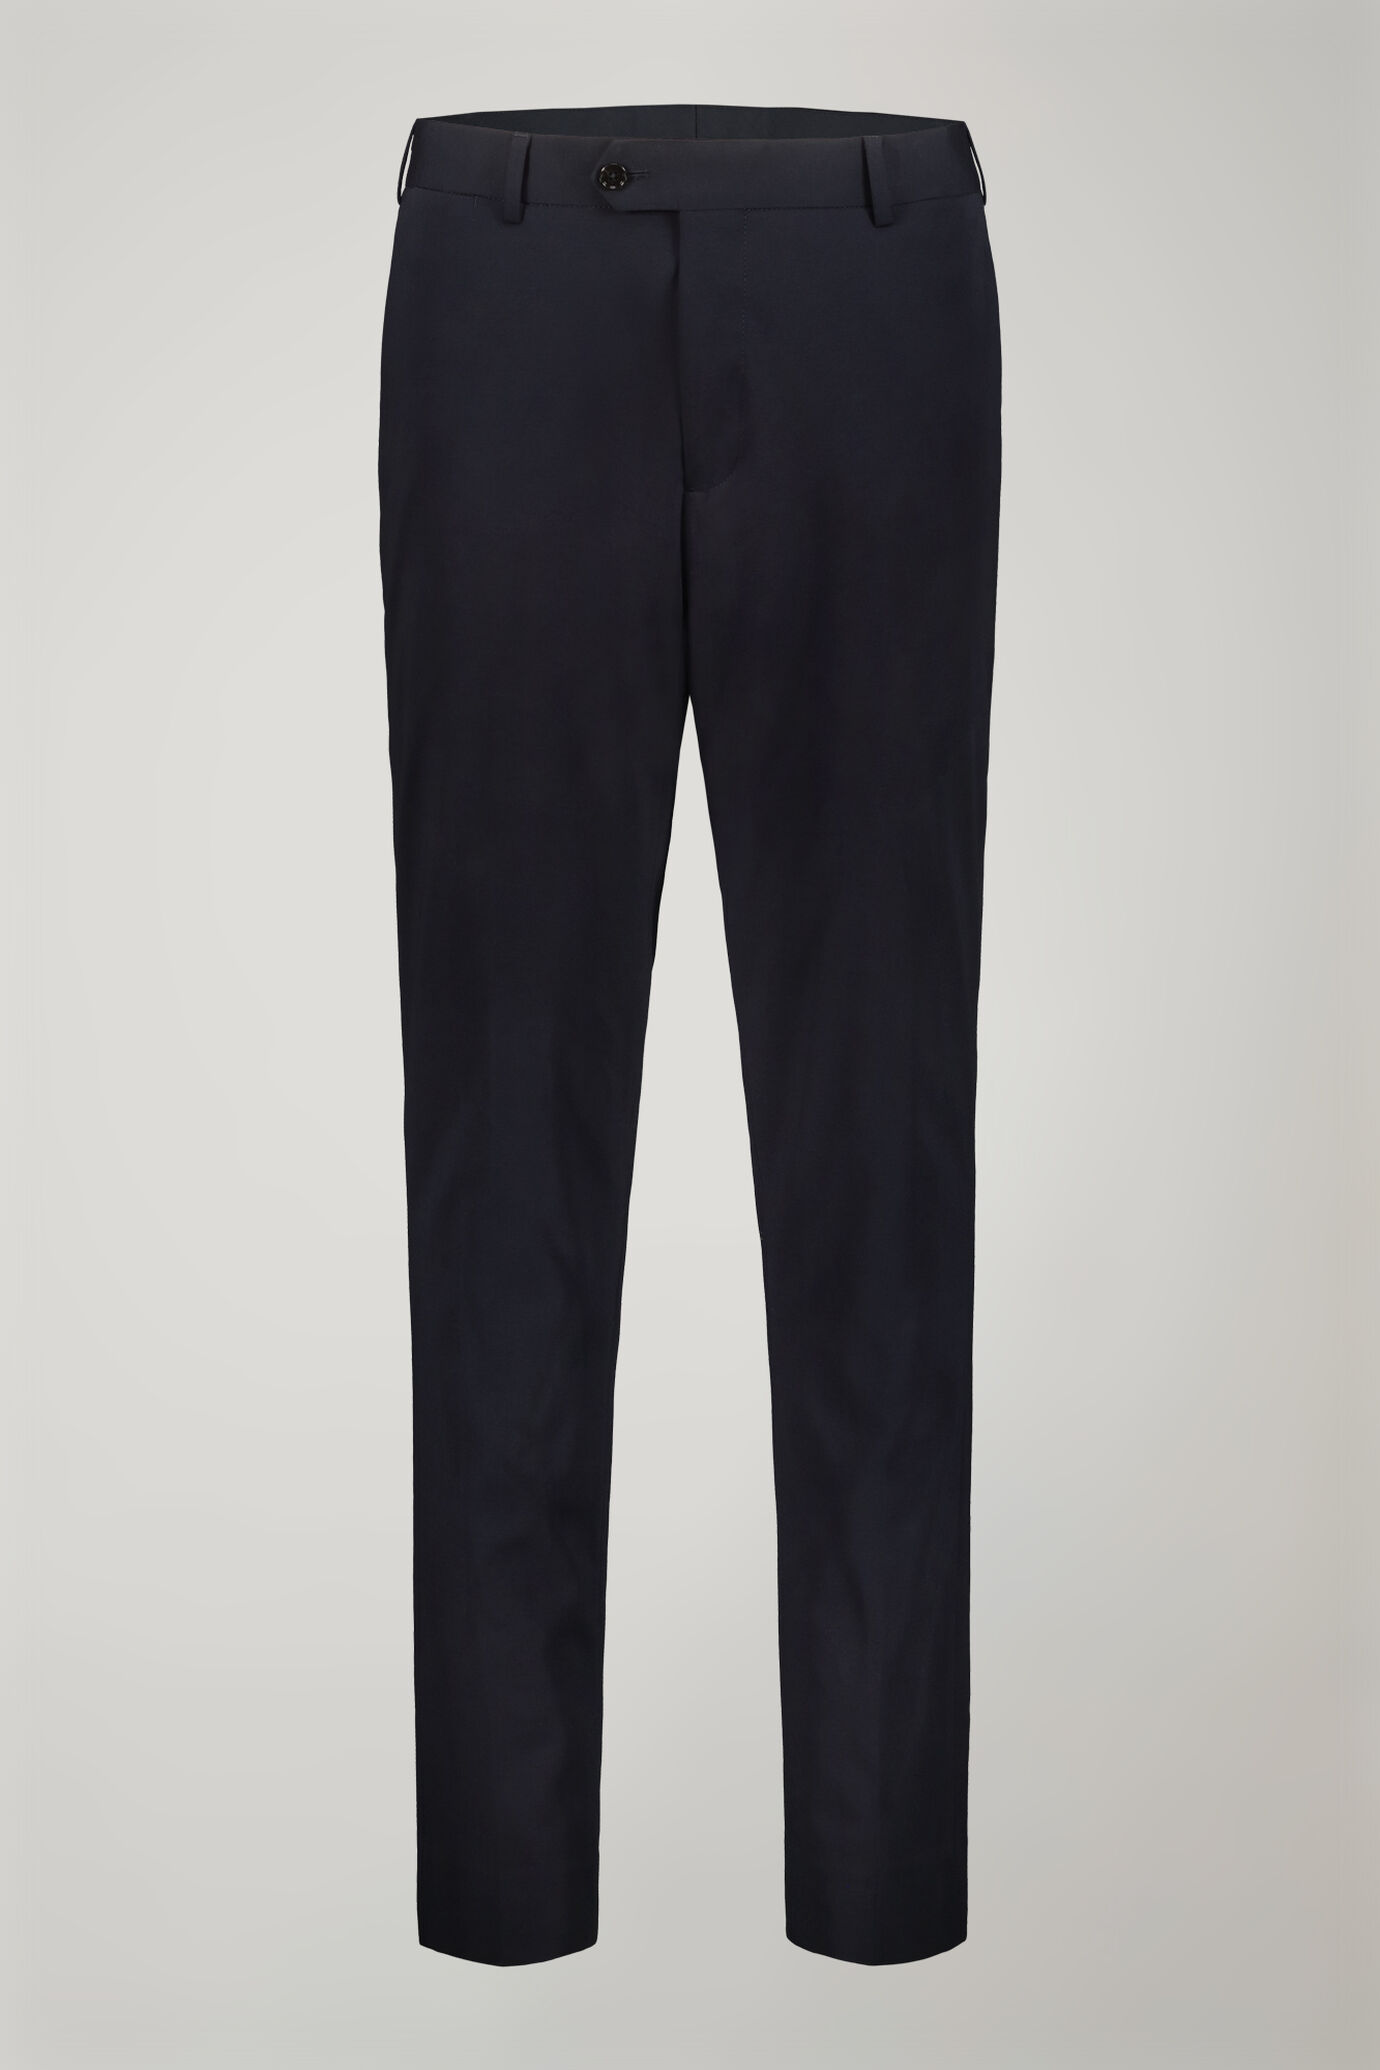 Men’s trousers in jersey without pleats with classic fold regular fit image number 4